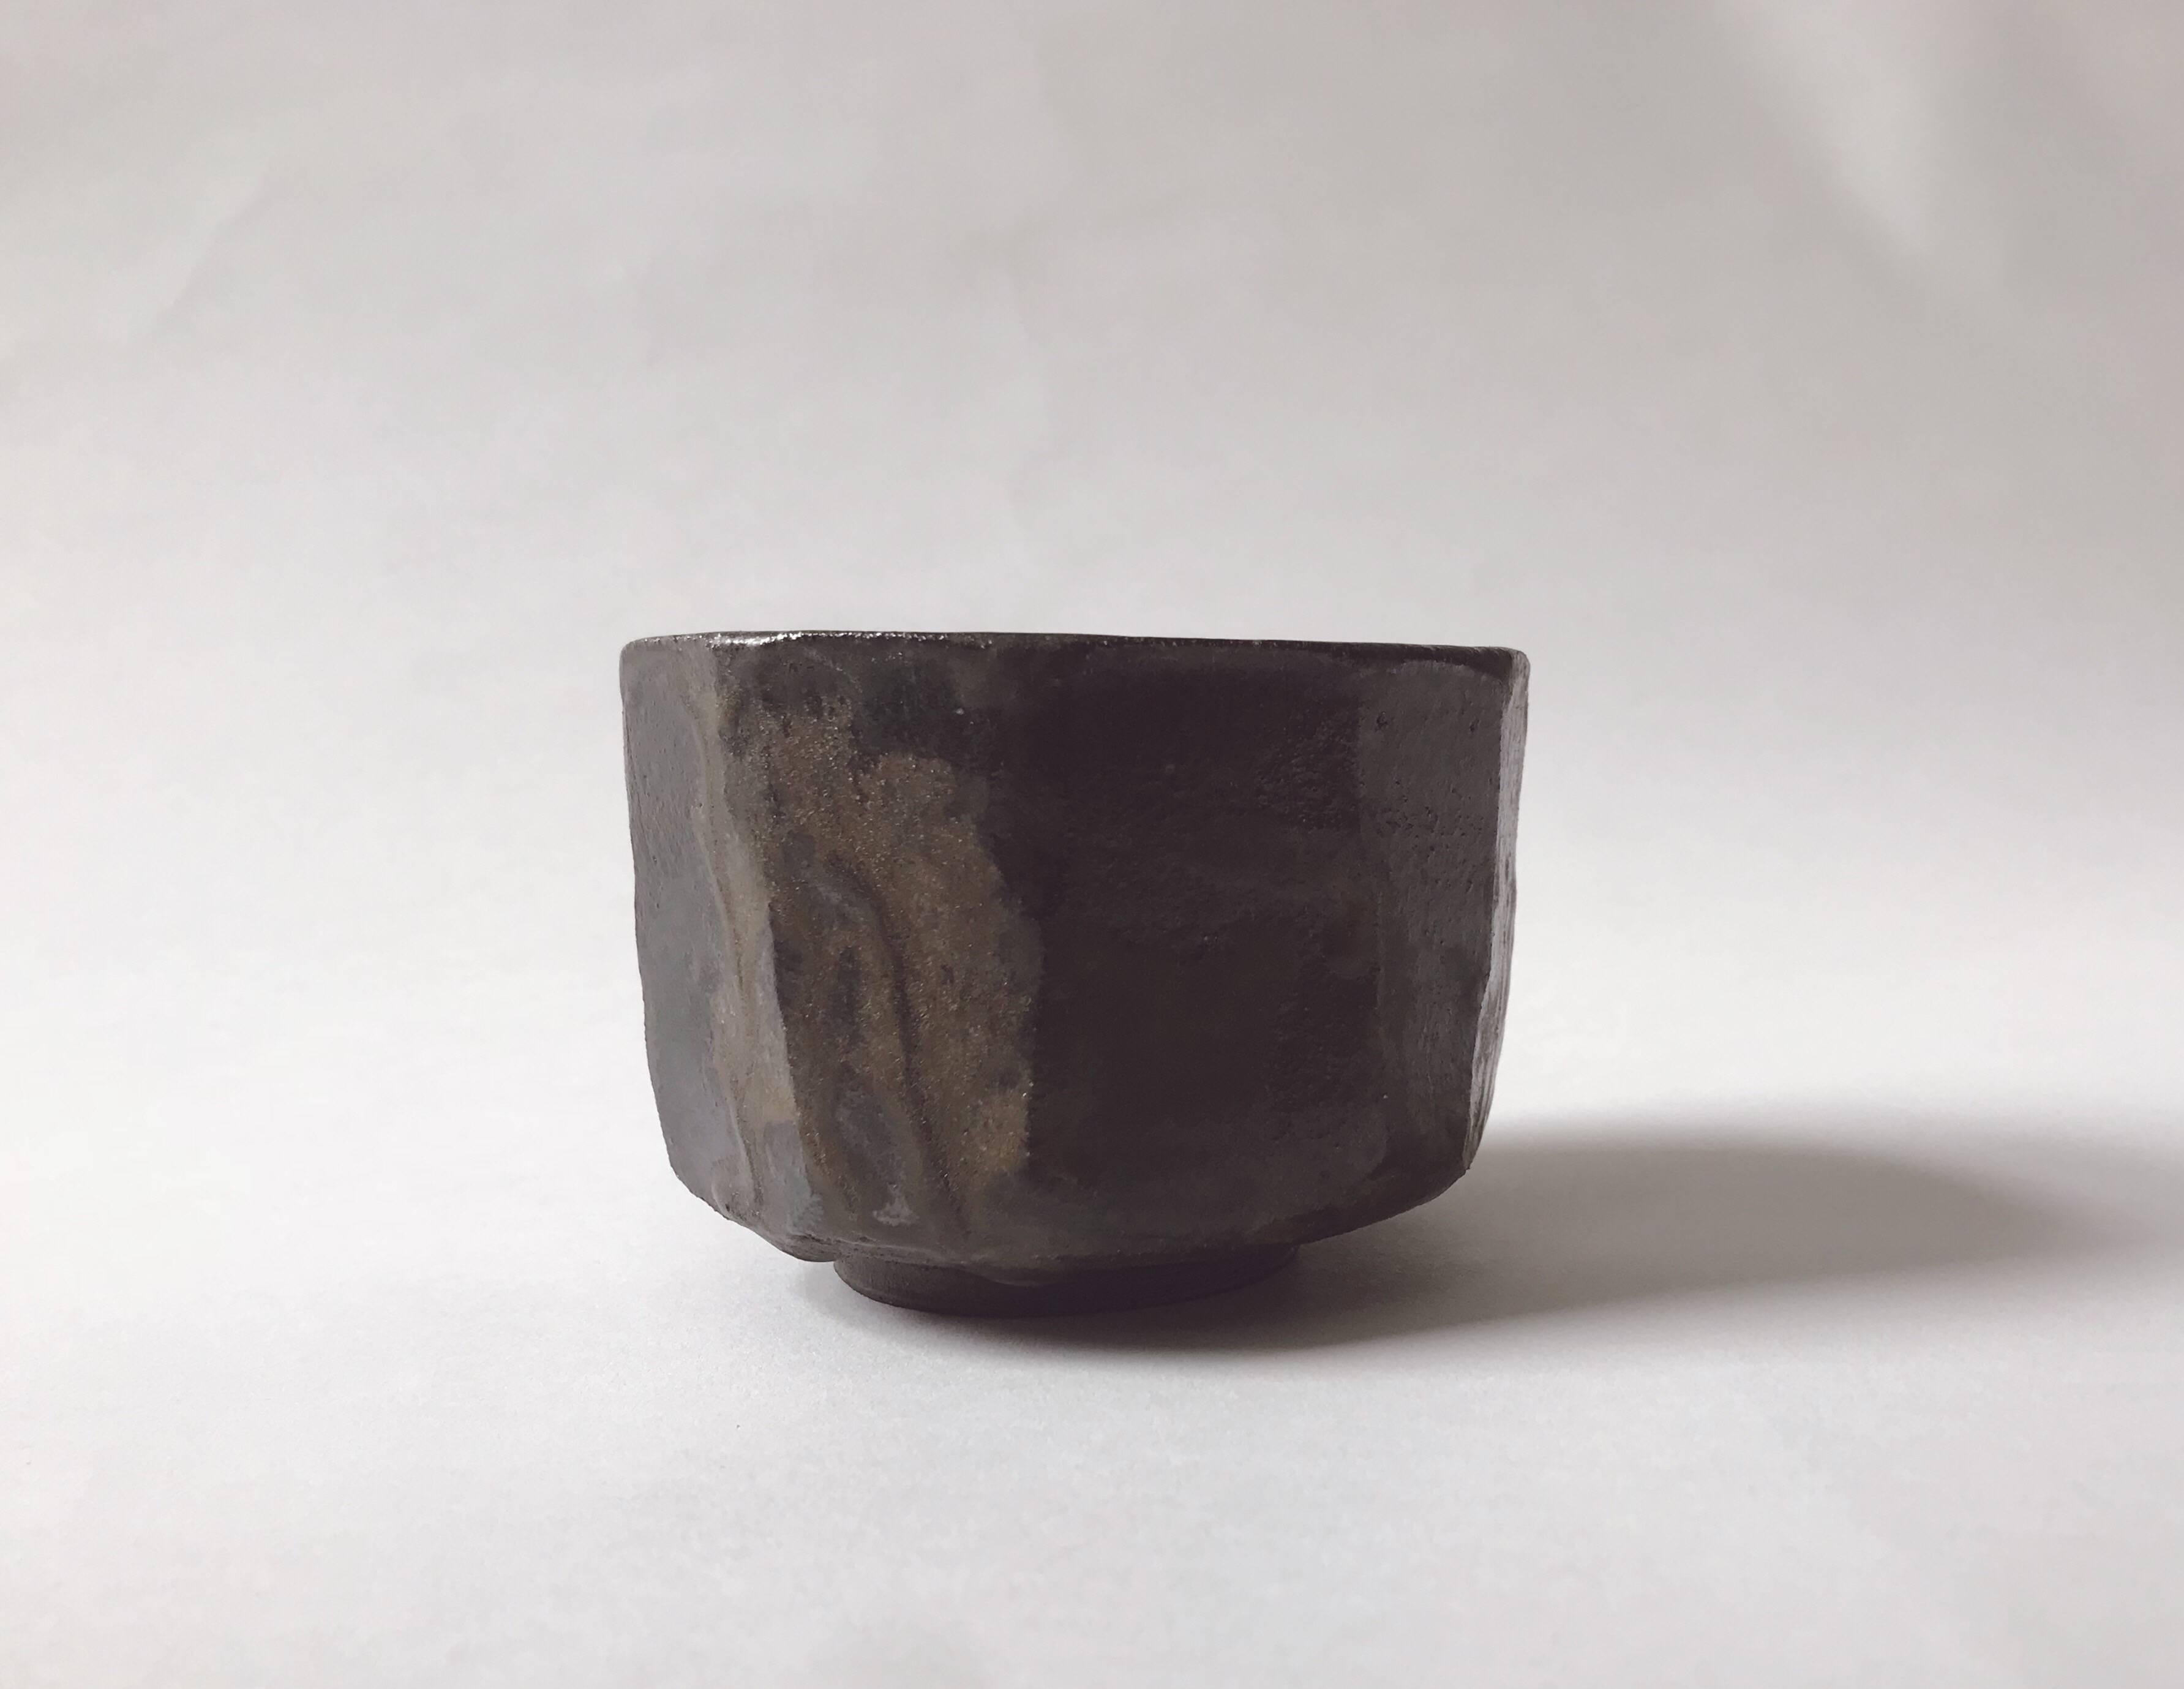 A tea cup with a dark, iridescent glaze by New York-based British artist Romy Northover in the Japanese-inspired style that has won her many admirers on both sides of the Atlantic. Shown in our Tea Ceremony exhibition which opened in May